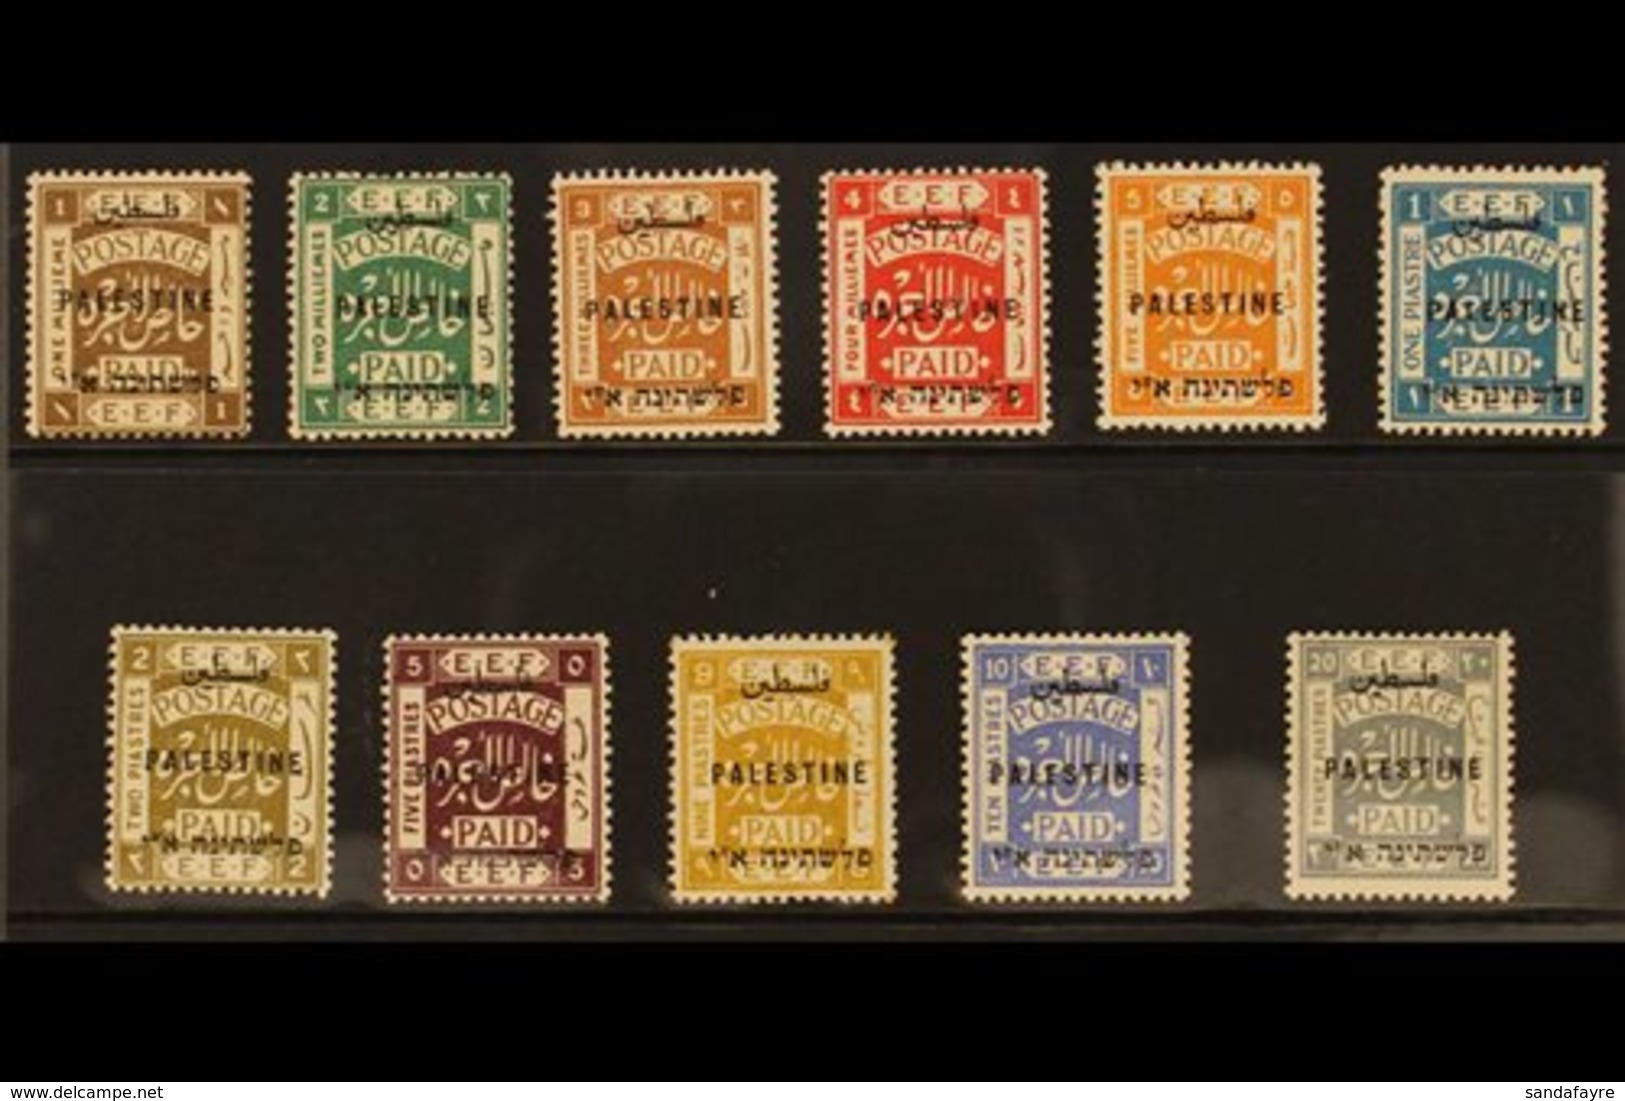 1921  Complete Set, Perf 15 X 14, Ovptd Type 7 (sans-serif Letters), SG 60/70, Very Fine Mint. (11 Stamps) For More Imag - Palestine